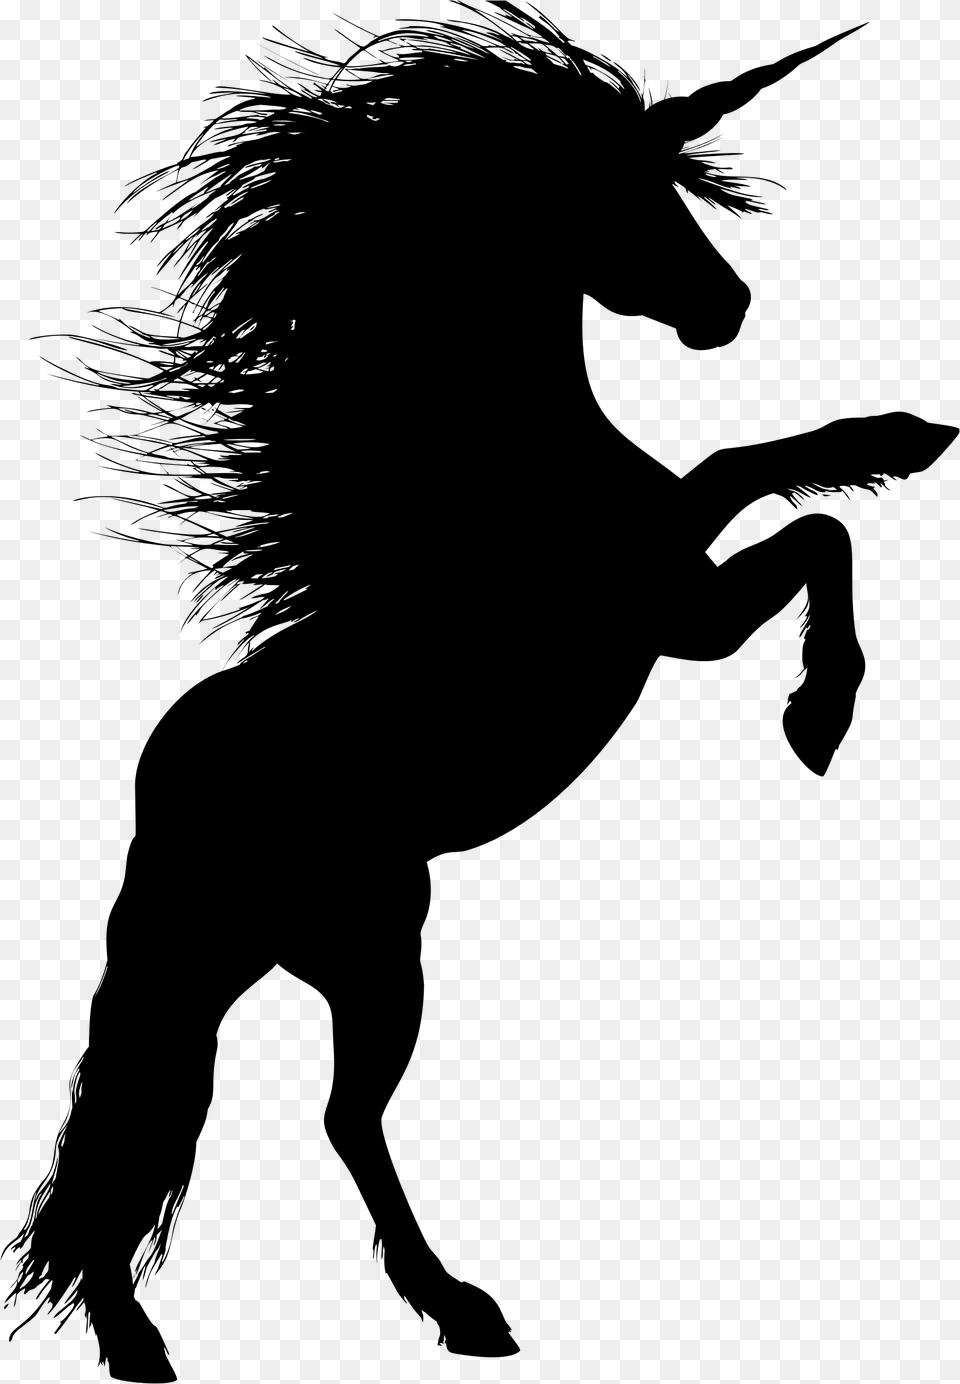 Animal Equine Rearing Horse Silhouette Ride Unicorn Silhouette Rearing Up, Gray Free Png